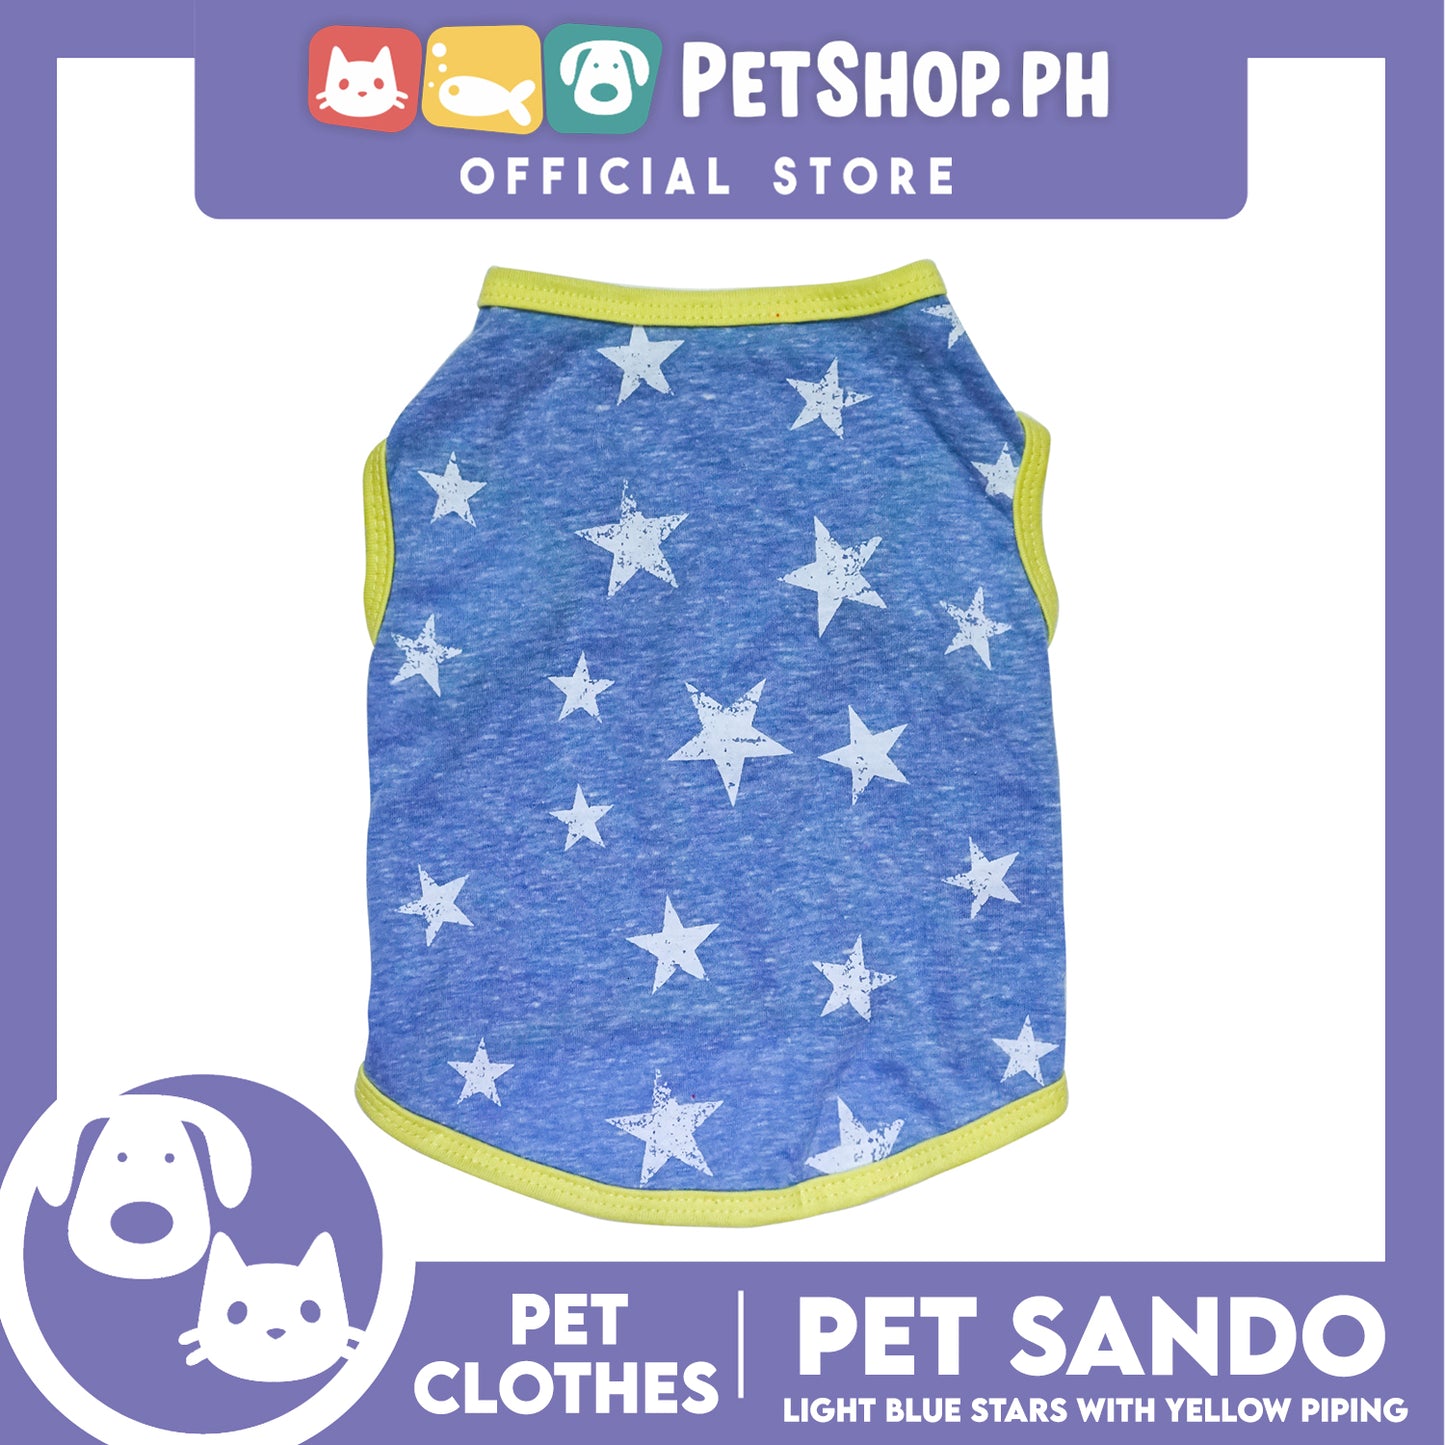 Pet Sando Light Blue Stars with Yellow Piping (Medium) Pet Shirt Clothes Perfect fit for Dogs